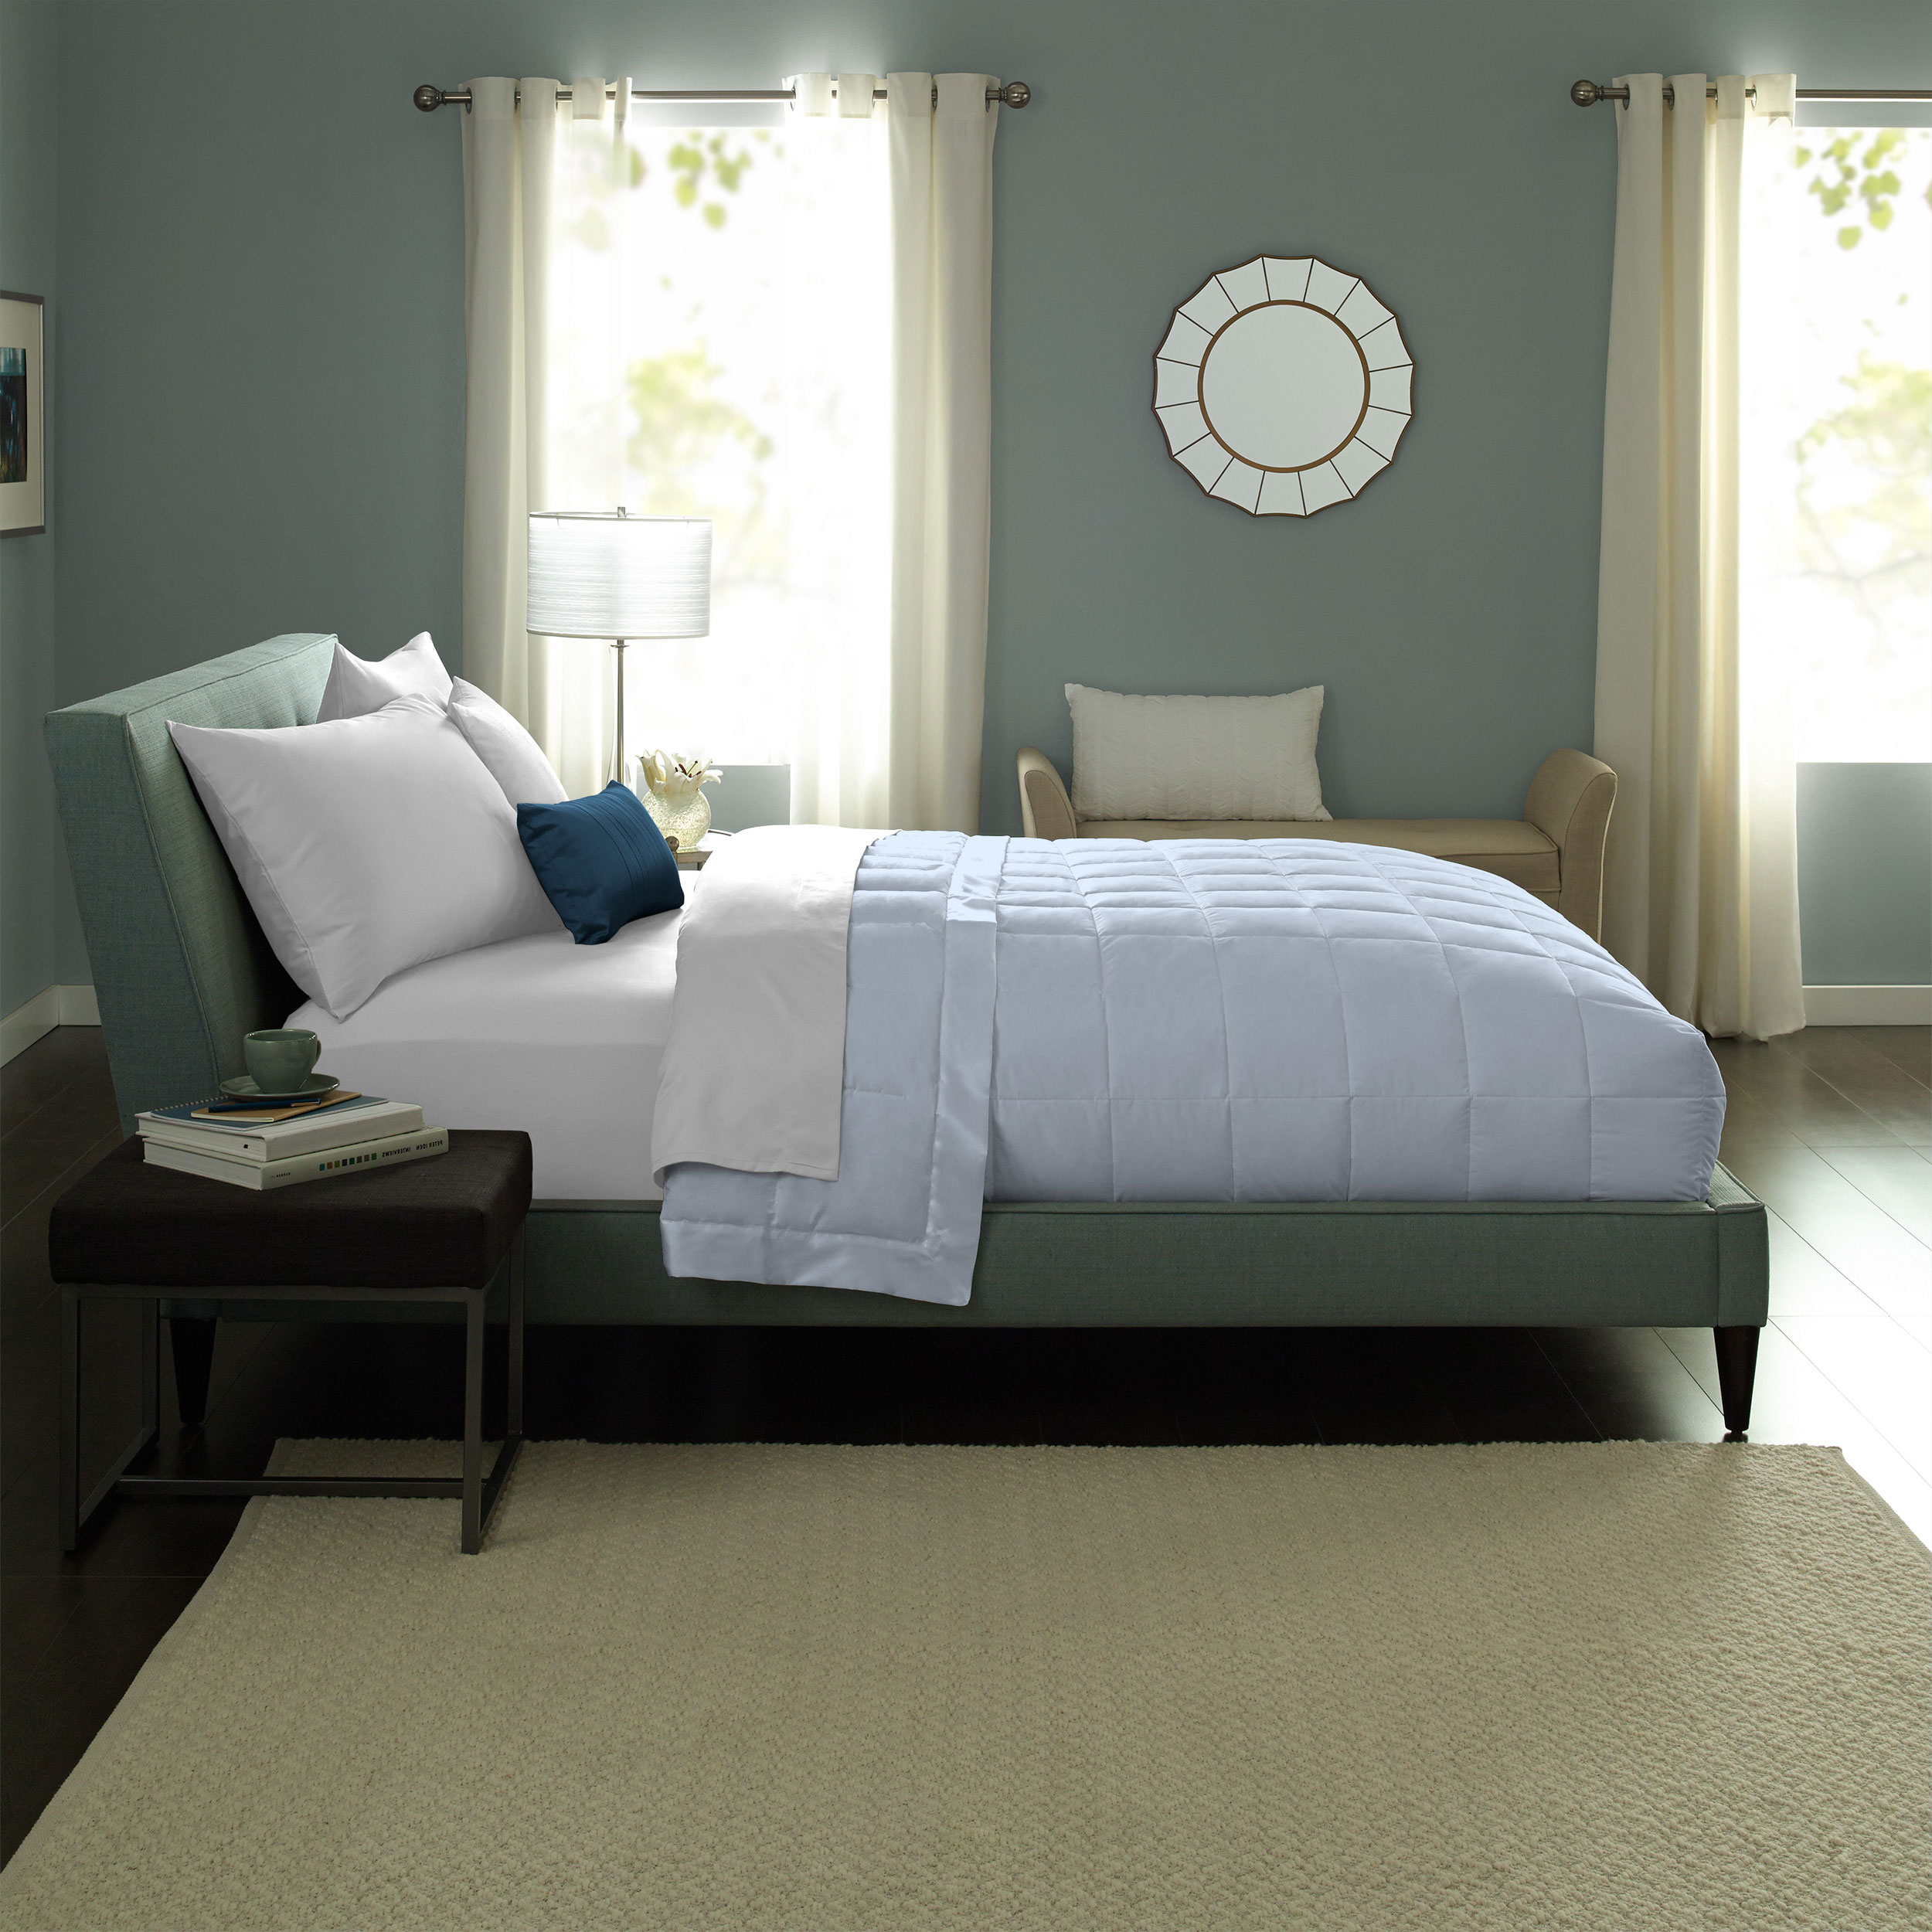 Pacific Coast Blue Down Blanket 230 Thread Count Resilia Feathers 550 Fill Power Down - Twin